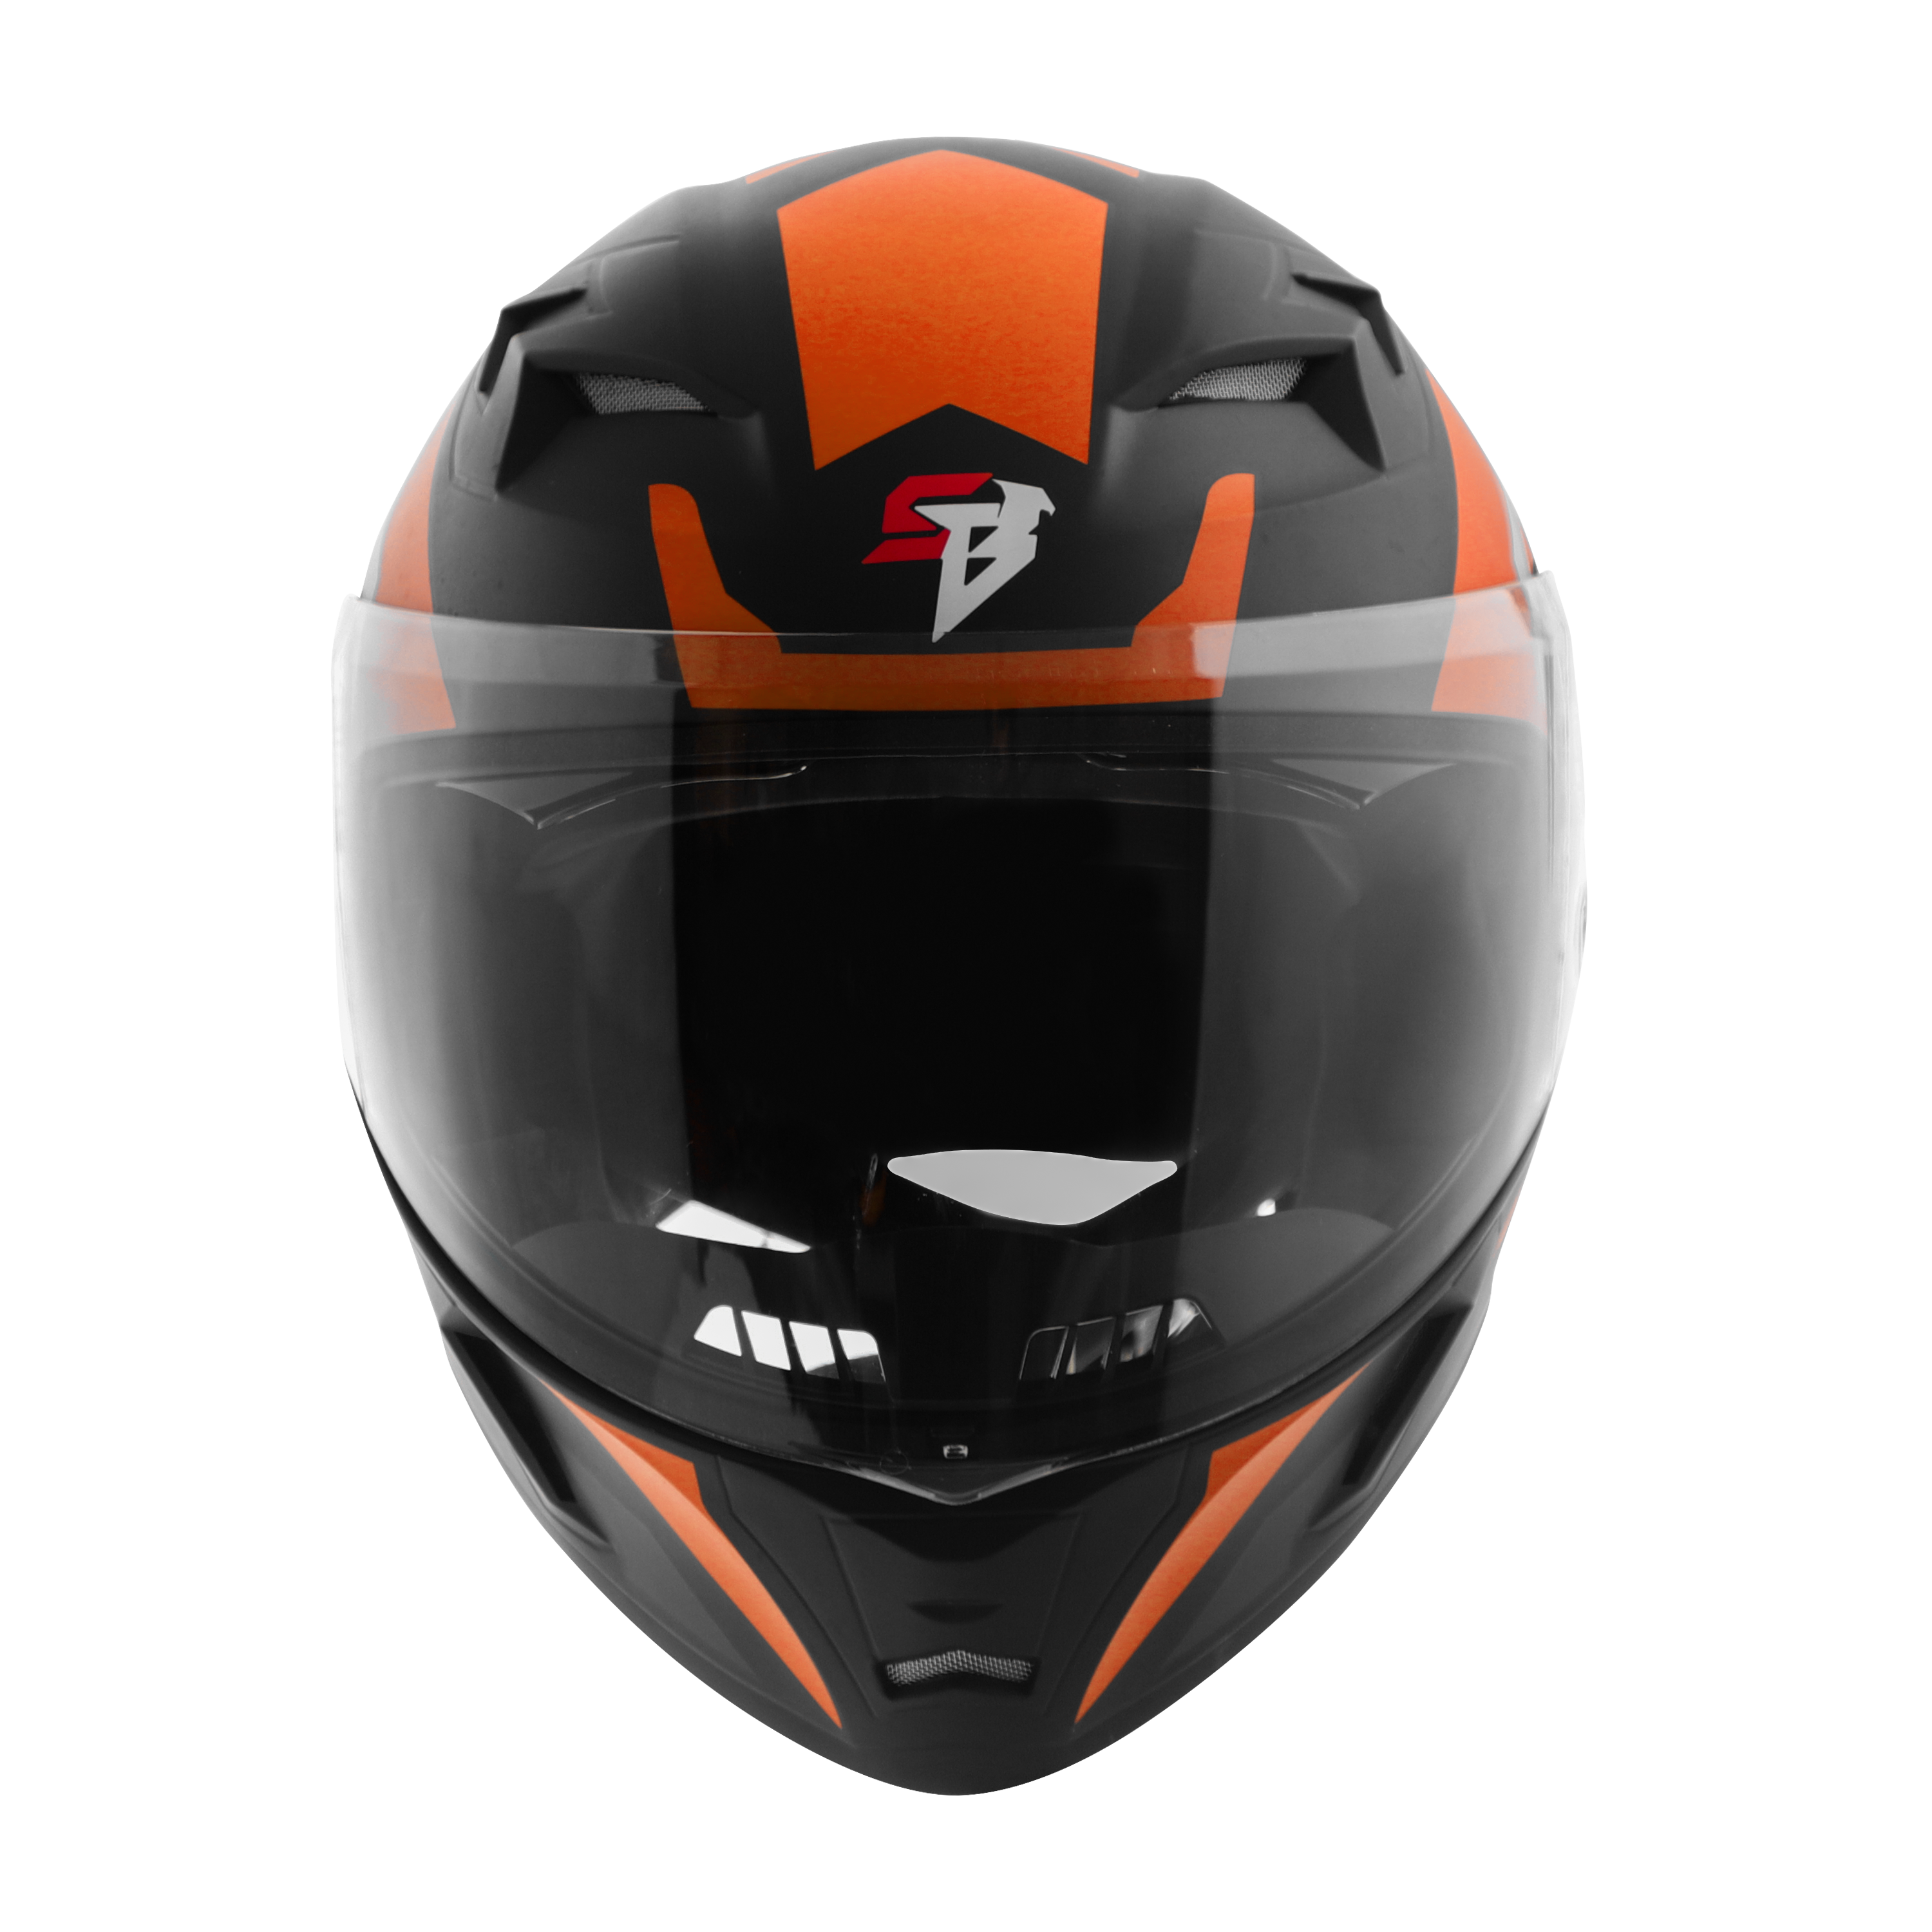 SBA-21 AIR (SV) GLOSSY BLACK WITH ORANGE WITH HIGH END INTERIOR